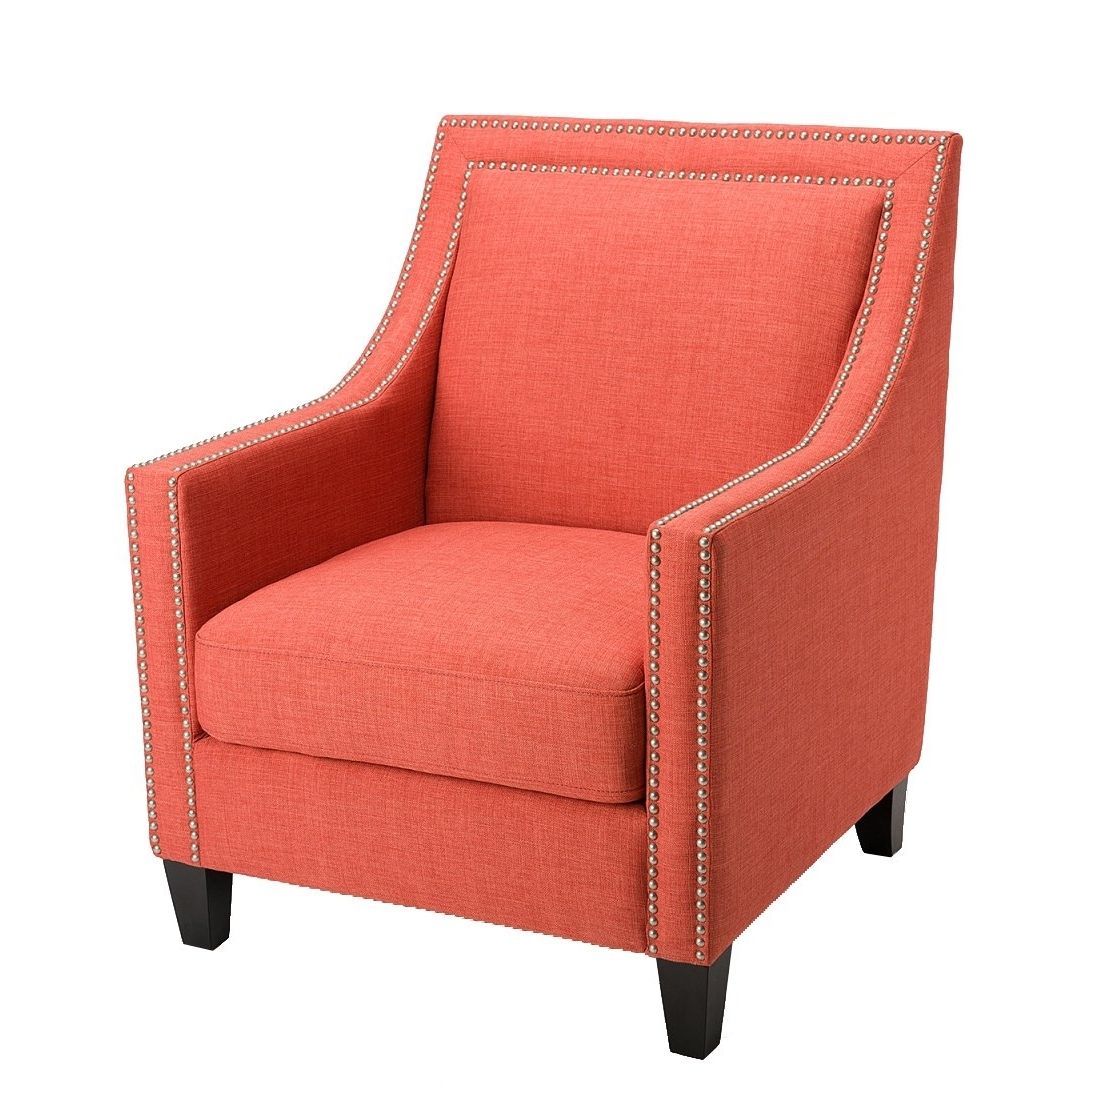 Well Known Cora Ii Arm Chairs Pertaining To Shop Clay Alder Home Alderson Arm Chair – Coral – On Sale – Free (View 5 of 20)